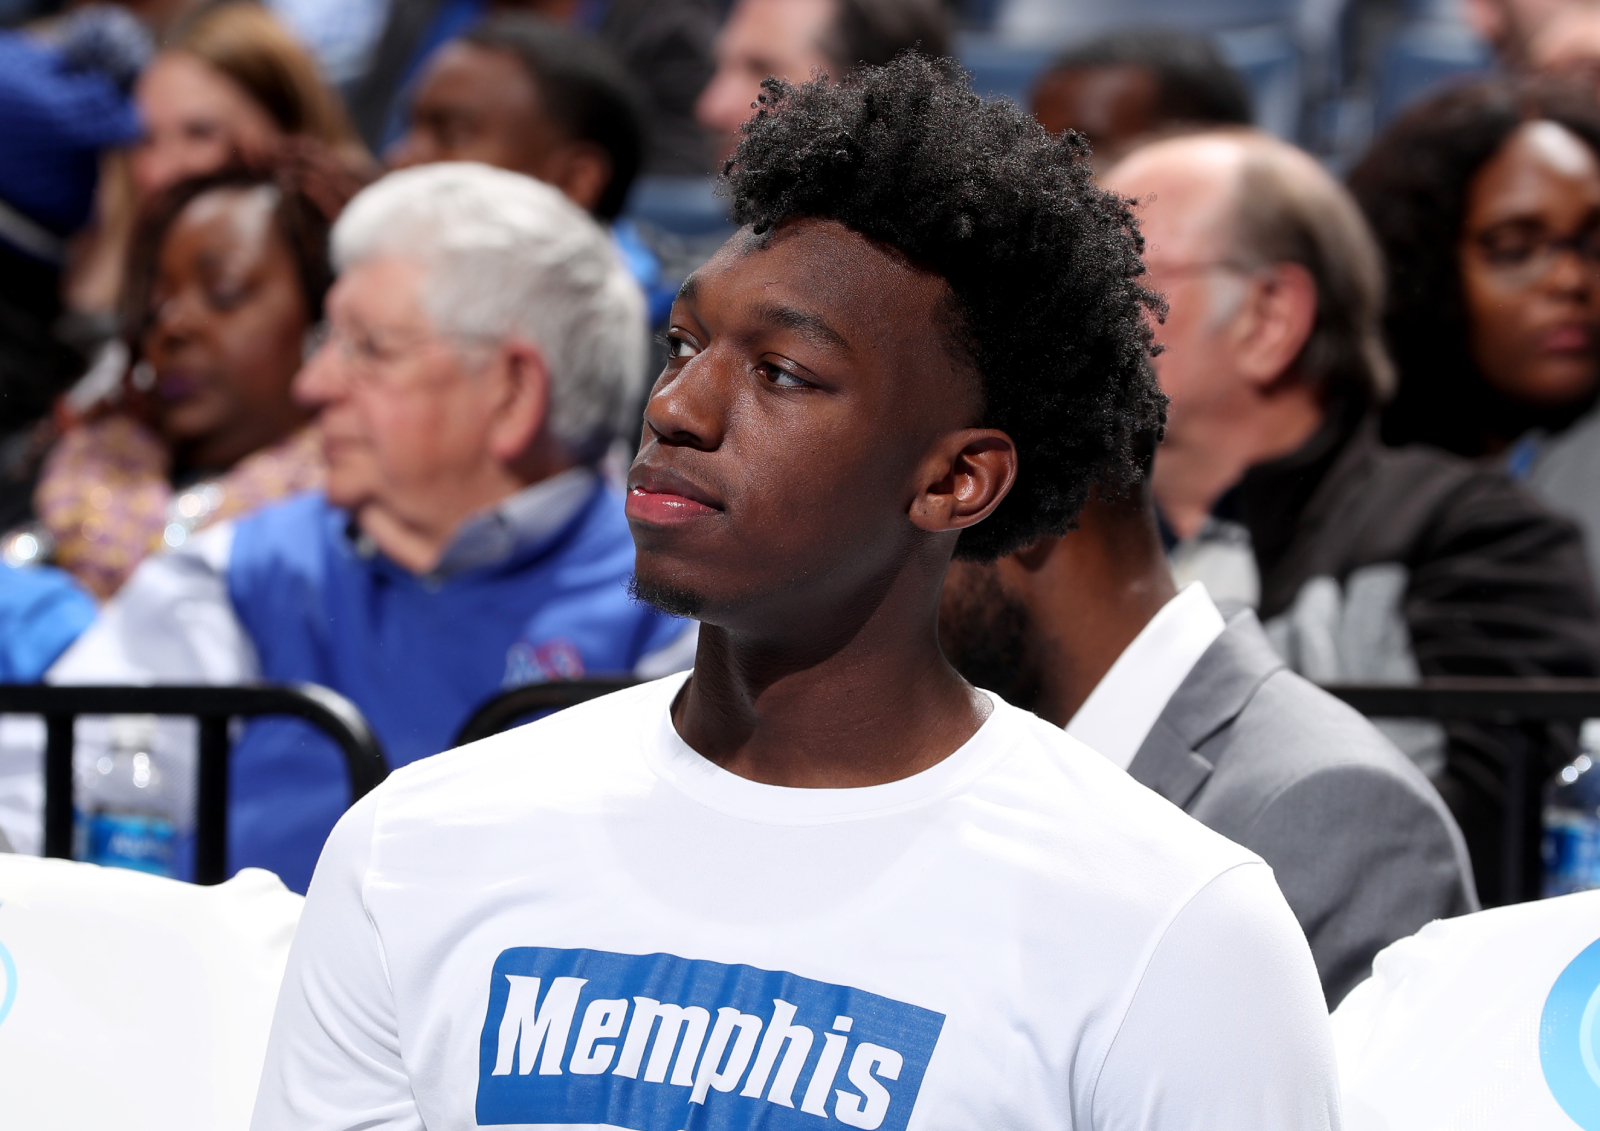 James Wiseman didn't play in the preseason for the Golden State Warriors, but he is already sending them a strong message with his play.